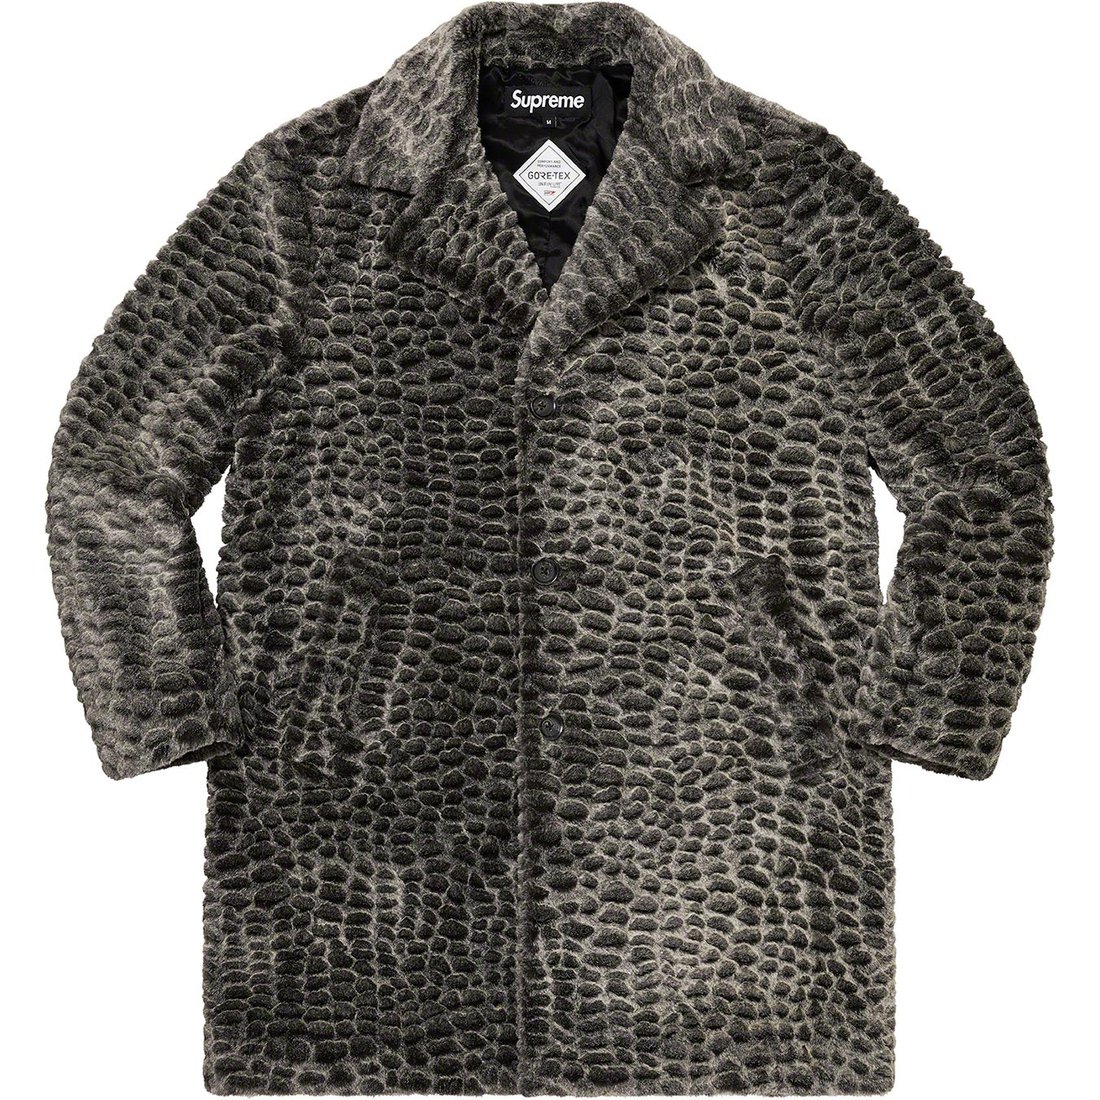 Details on Croc Faux Fur Overcoat Black from spring summer 2023 (Price is $398)